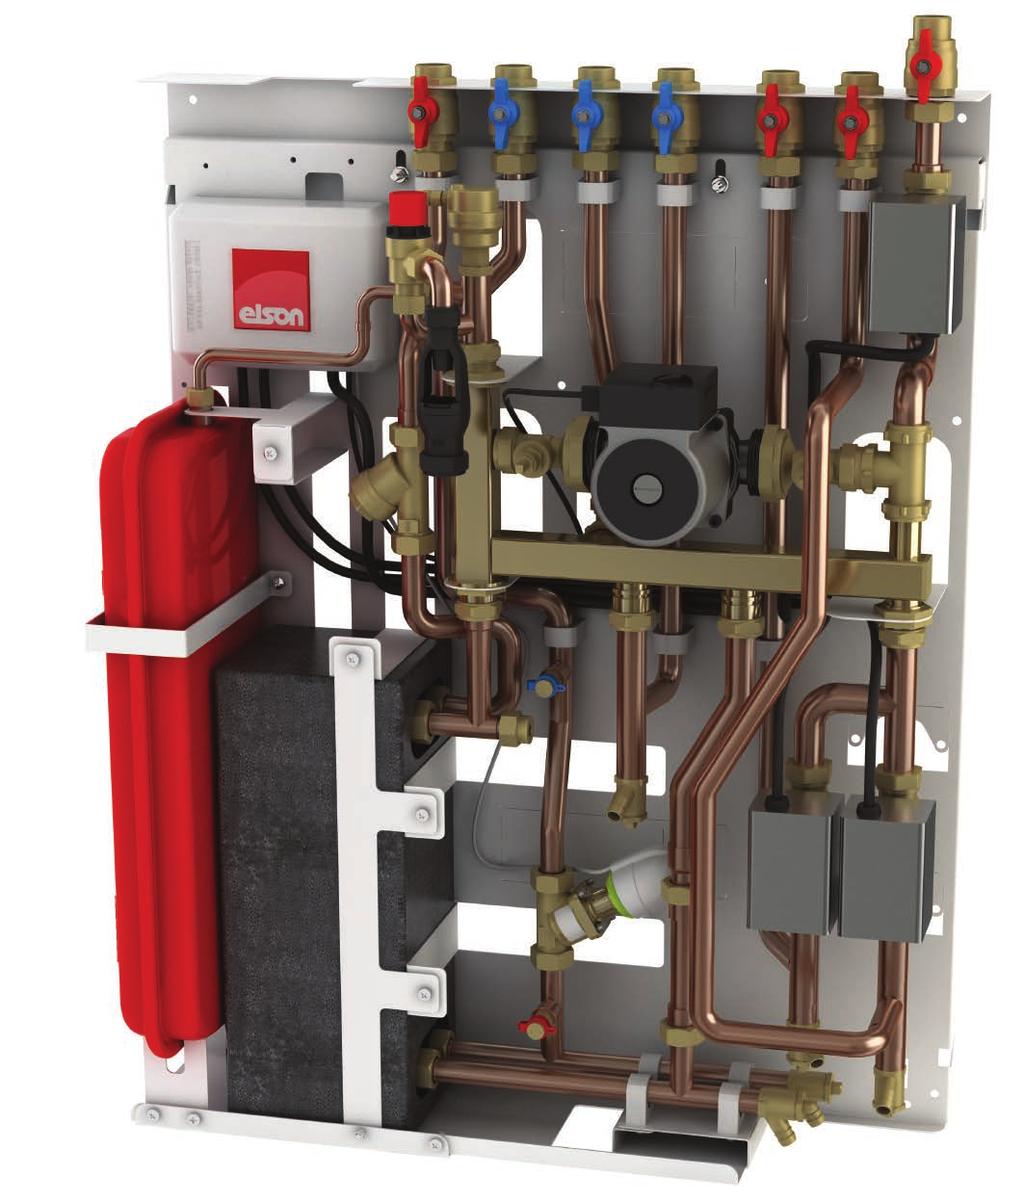 Stored Water District Heating Interface Units Product features 12 1 3 4 8 7 2 13 14 5